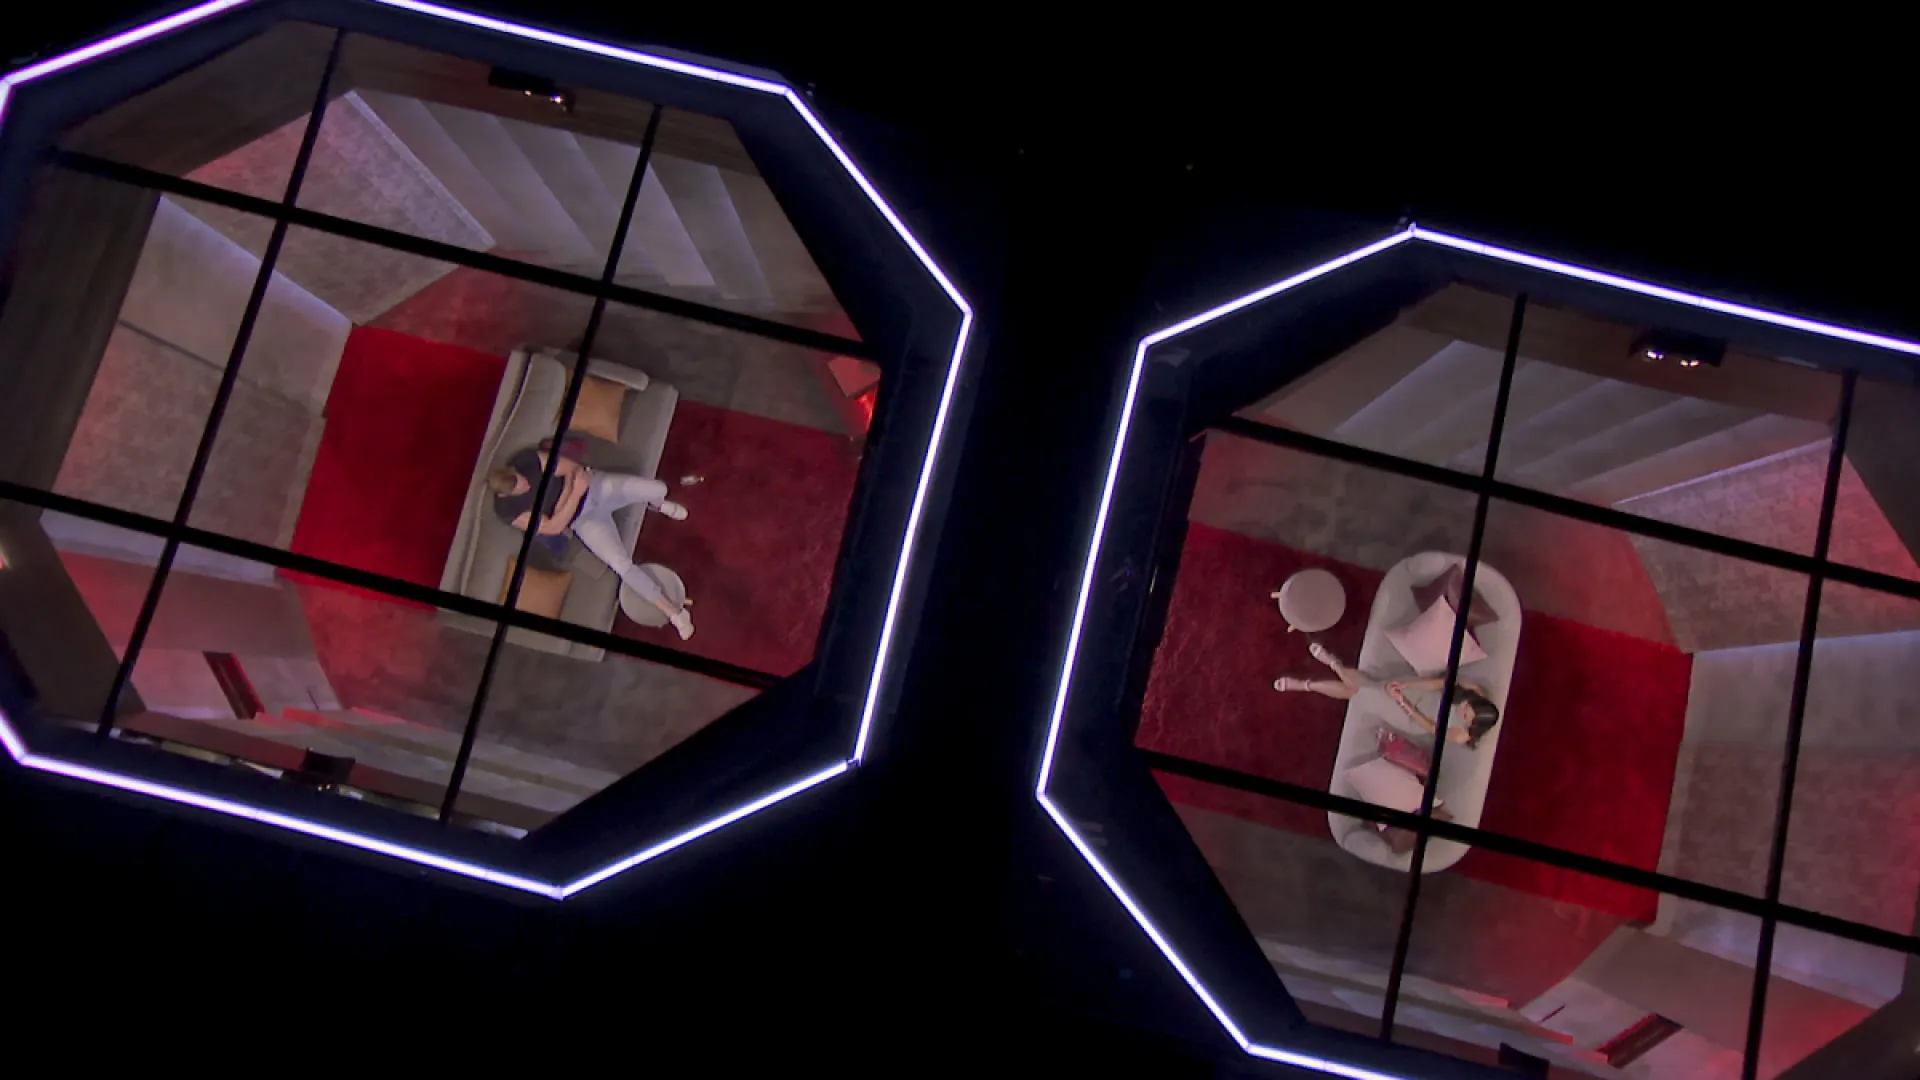 Two pods from Love Is Blind, shot from above through glass ceilings